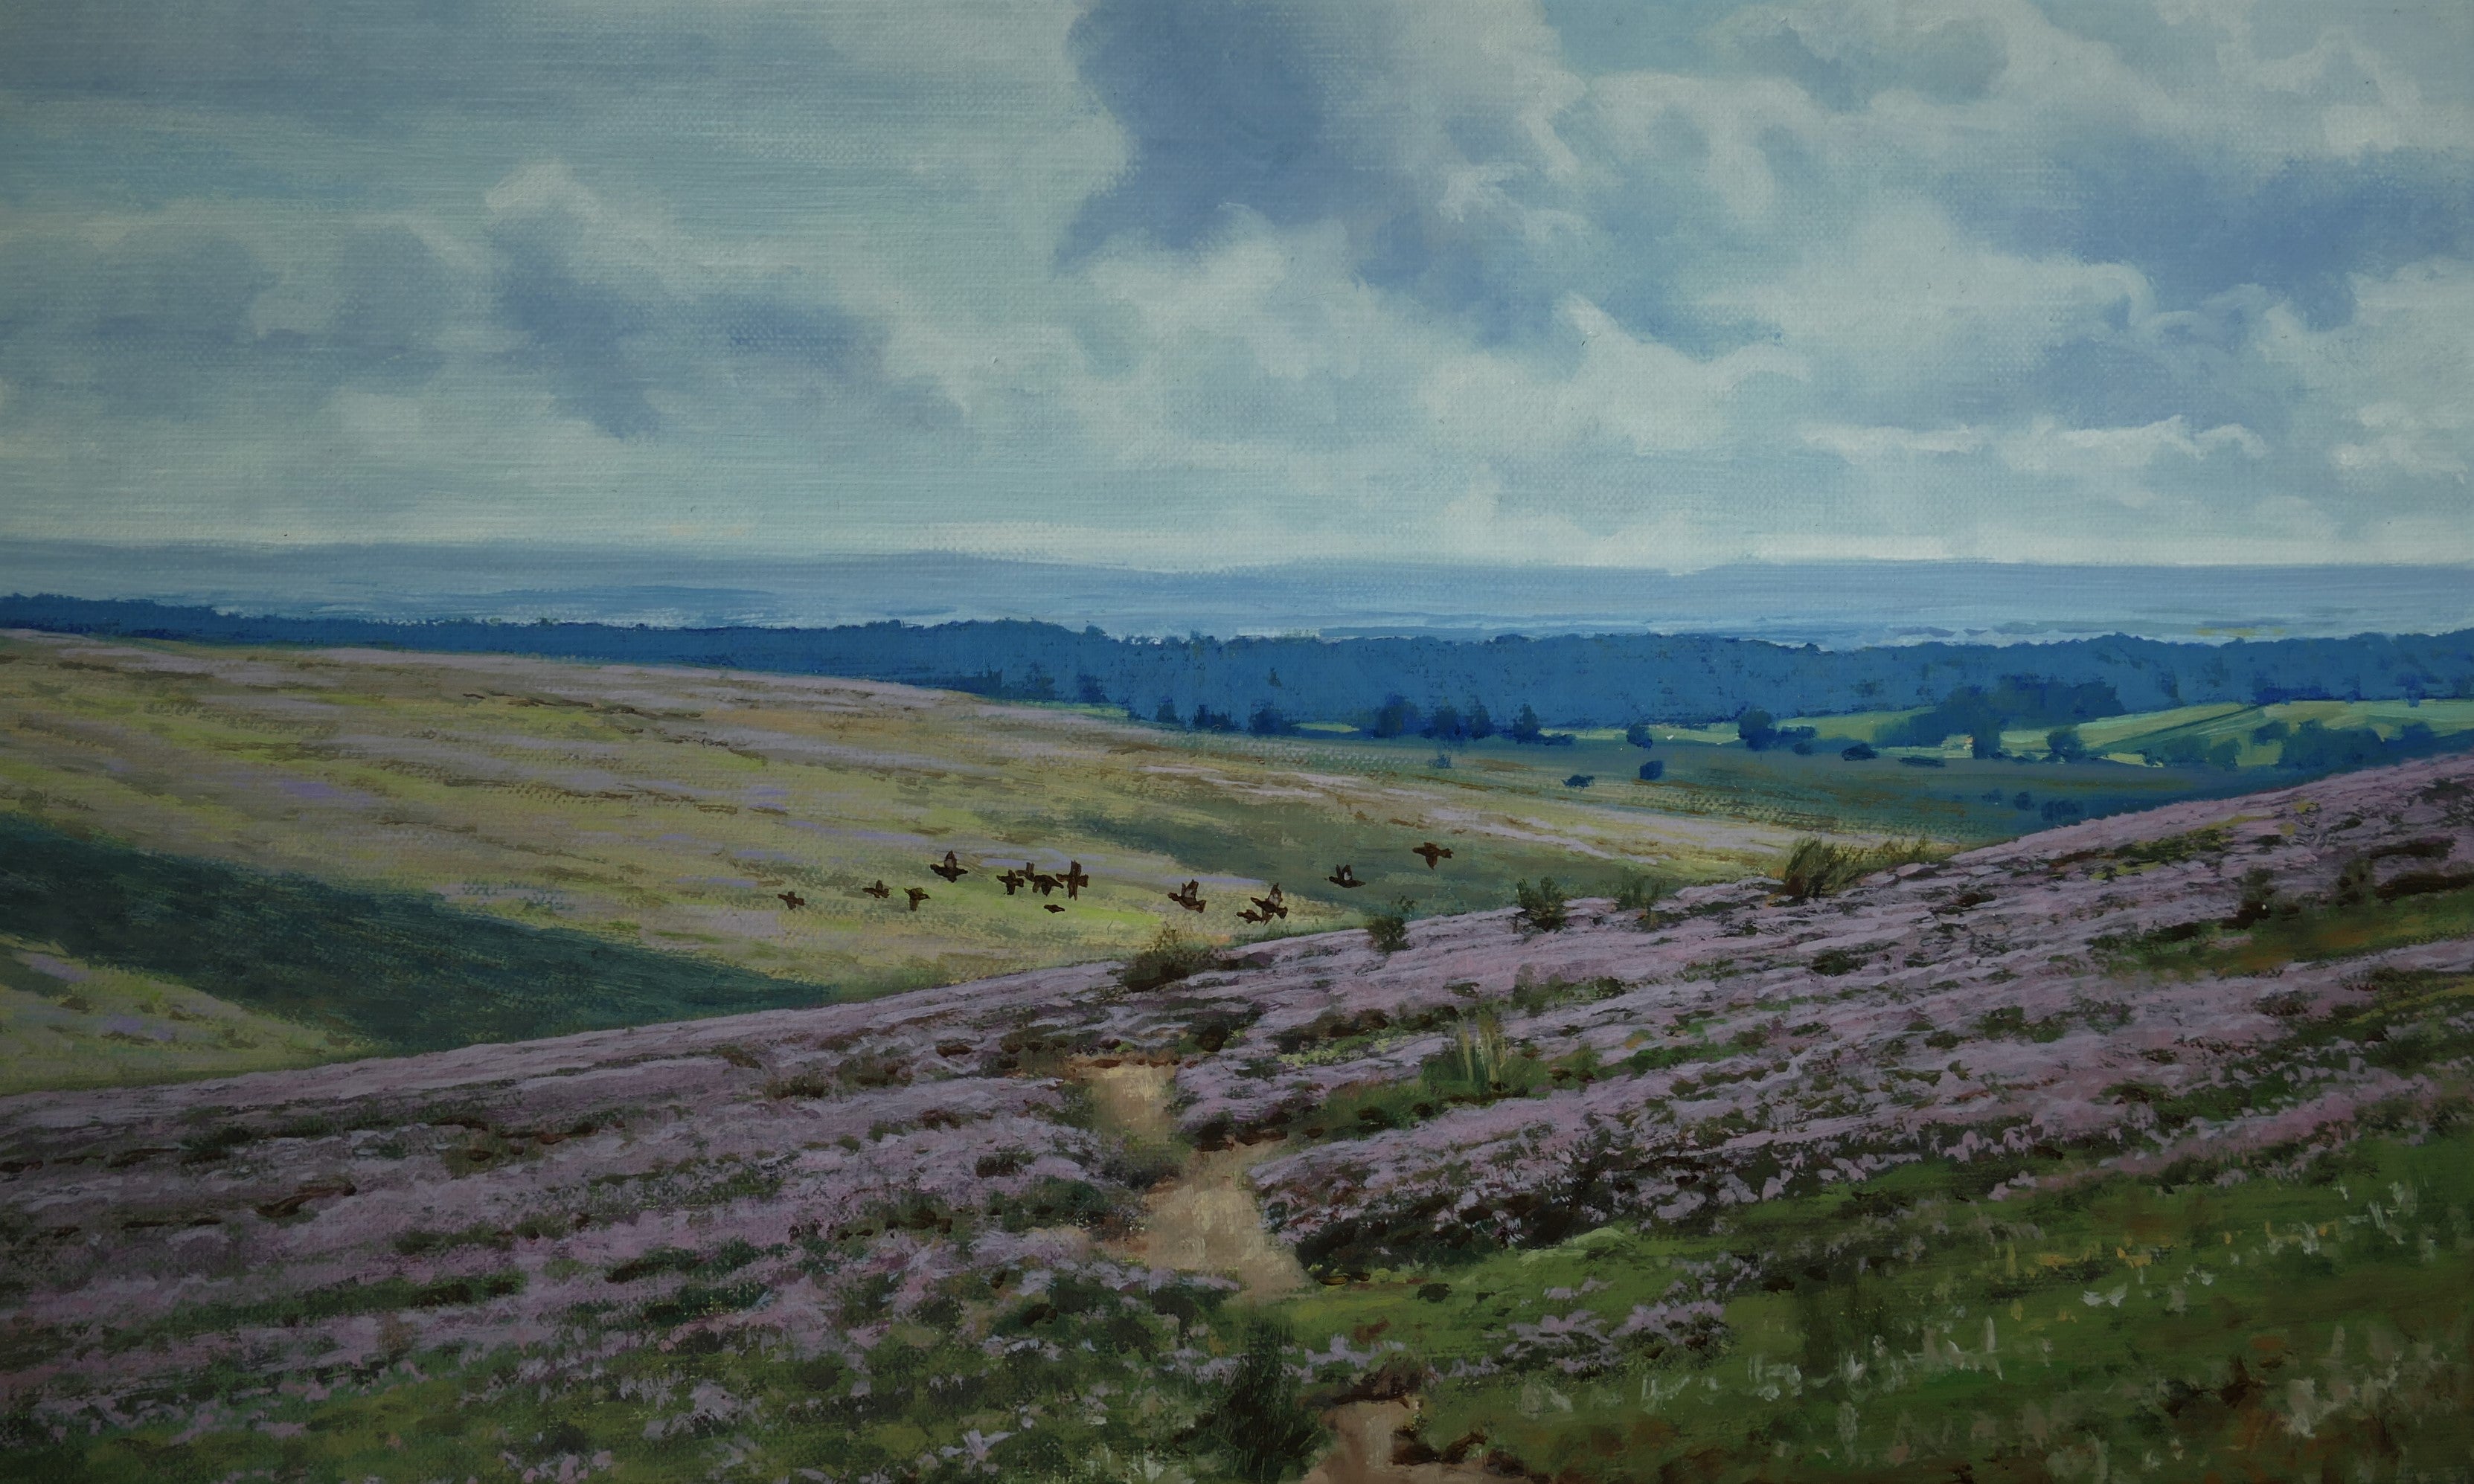 'North Yorks Grouse' - Original Oil Painting by Alistair Makinson - 30 x 40cm